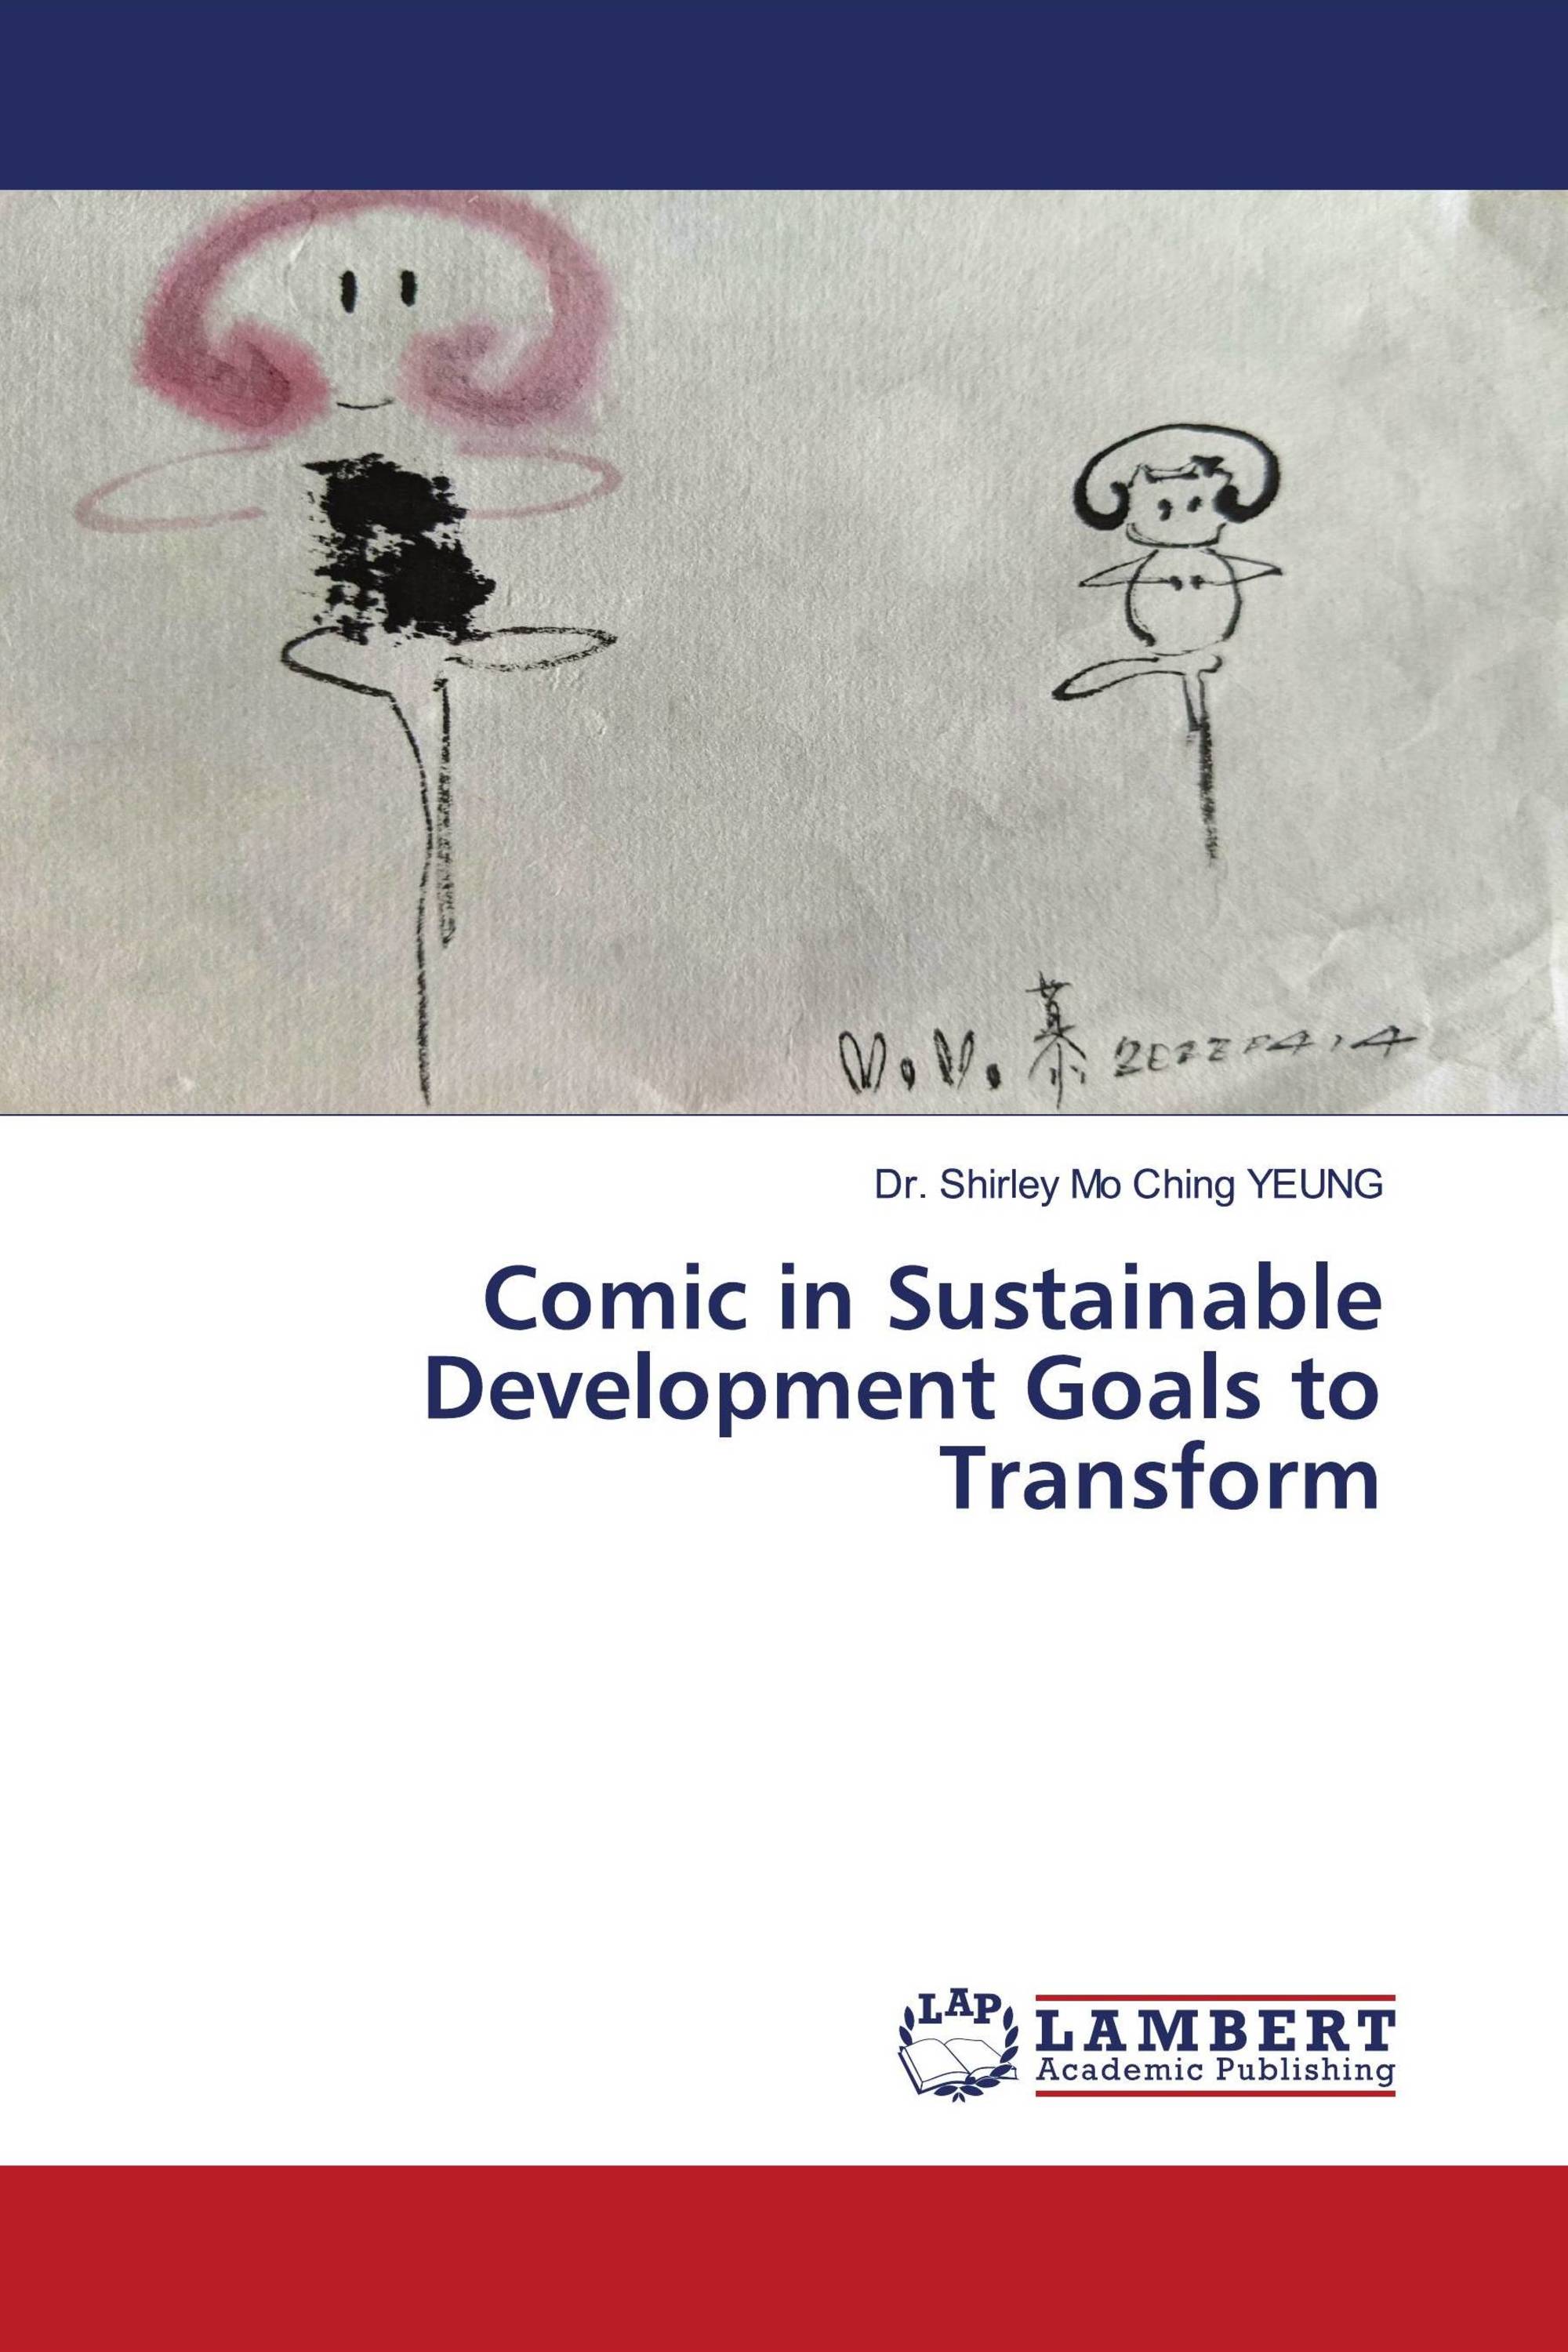 Comic in Sustainable Development Goals to Transform